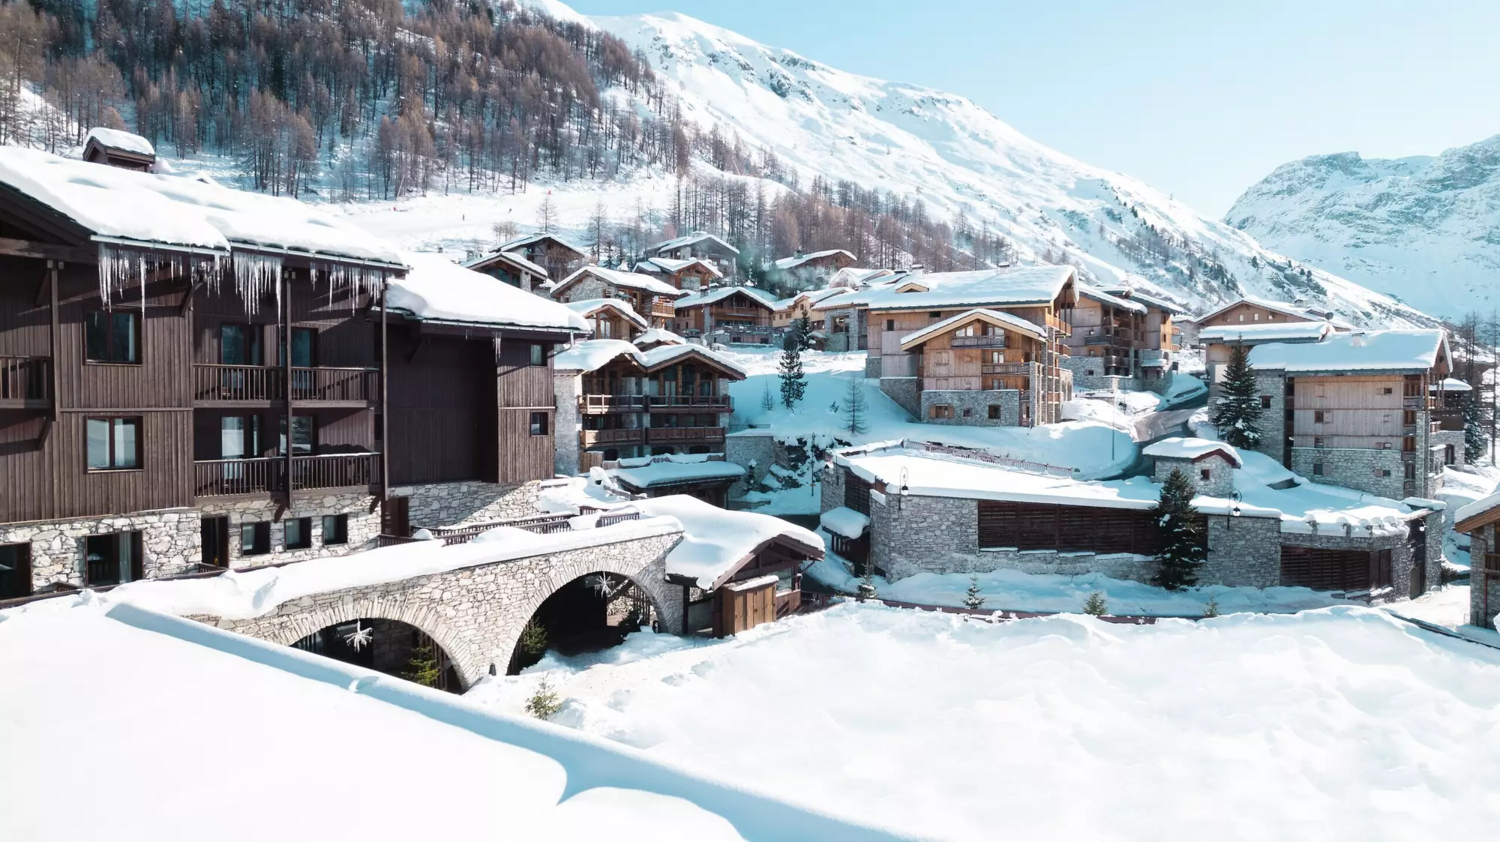 FRANCE - VAL D'ISERE - CLUB MED VAL D'ISERE **** - 8 JOURS/ 7 NUITS